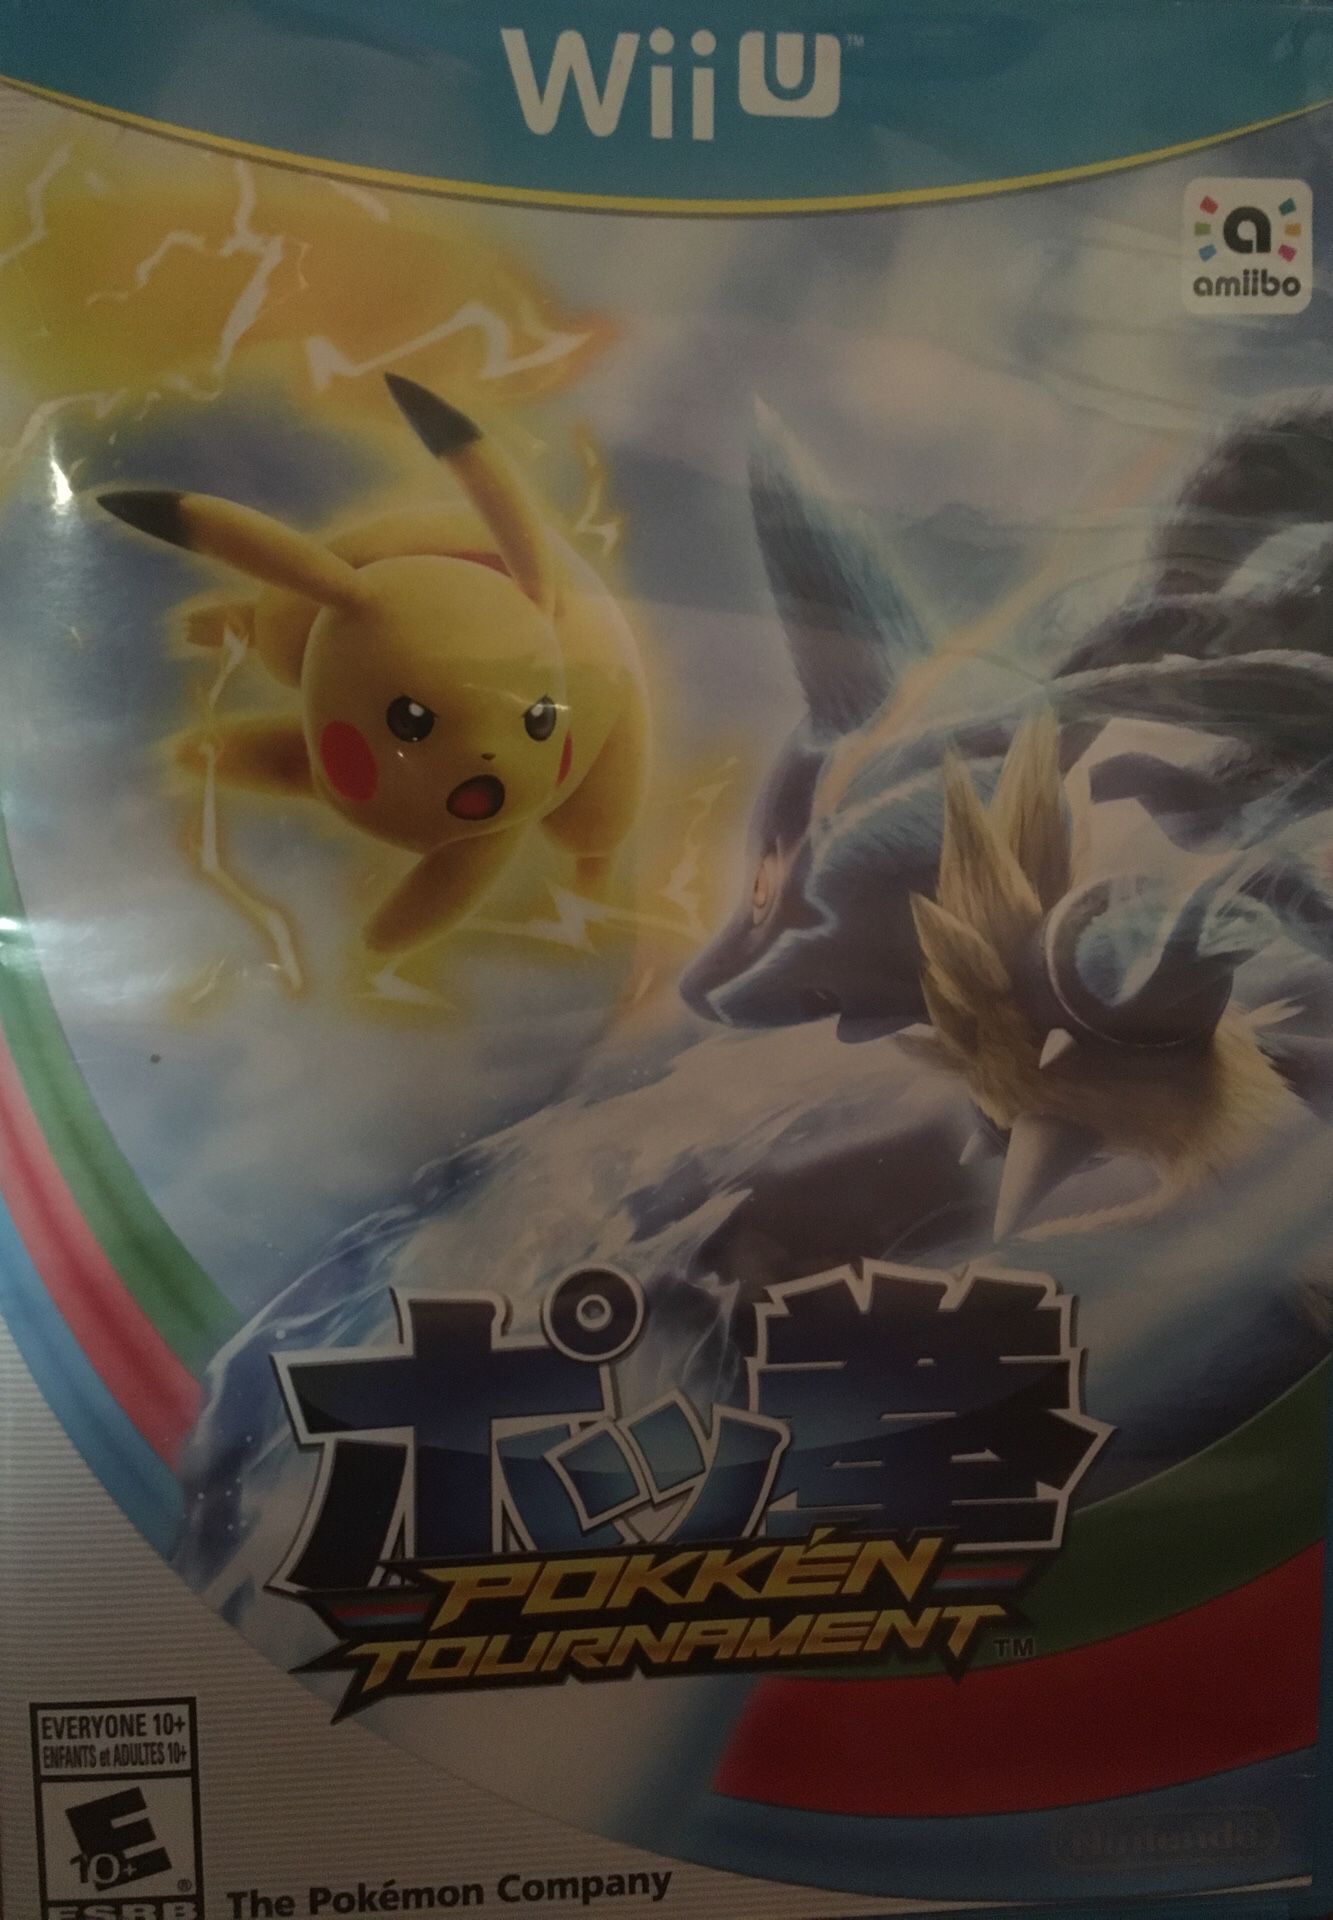 Pokken tournament for wii u not for nintendo switch